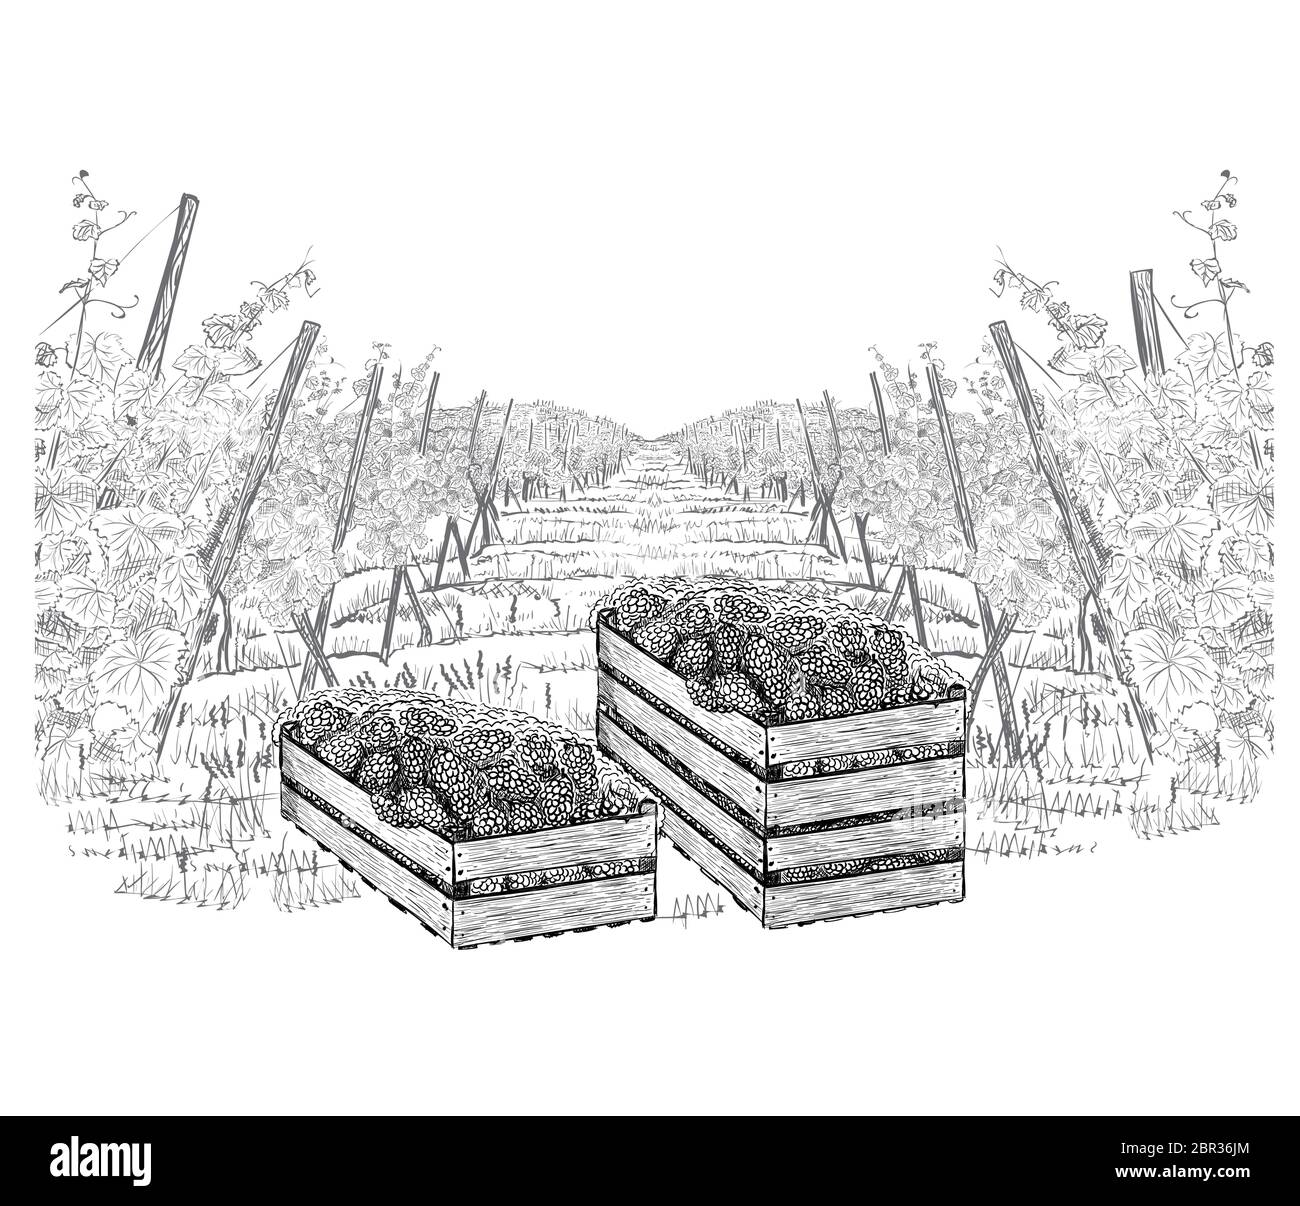 Landscape of vineyard with grapes in three wood boxes on plantations. Vector illustration in sketch style isolated on a white. Stock Vector